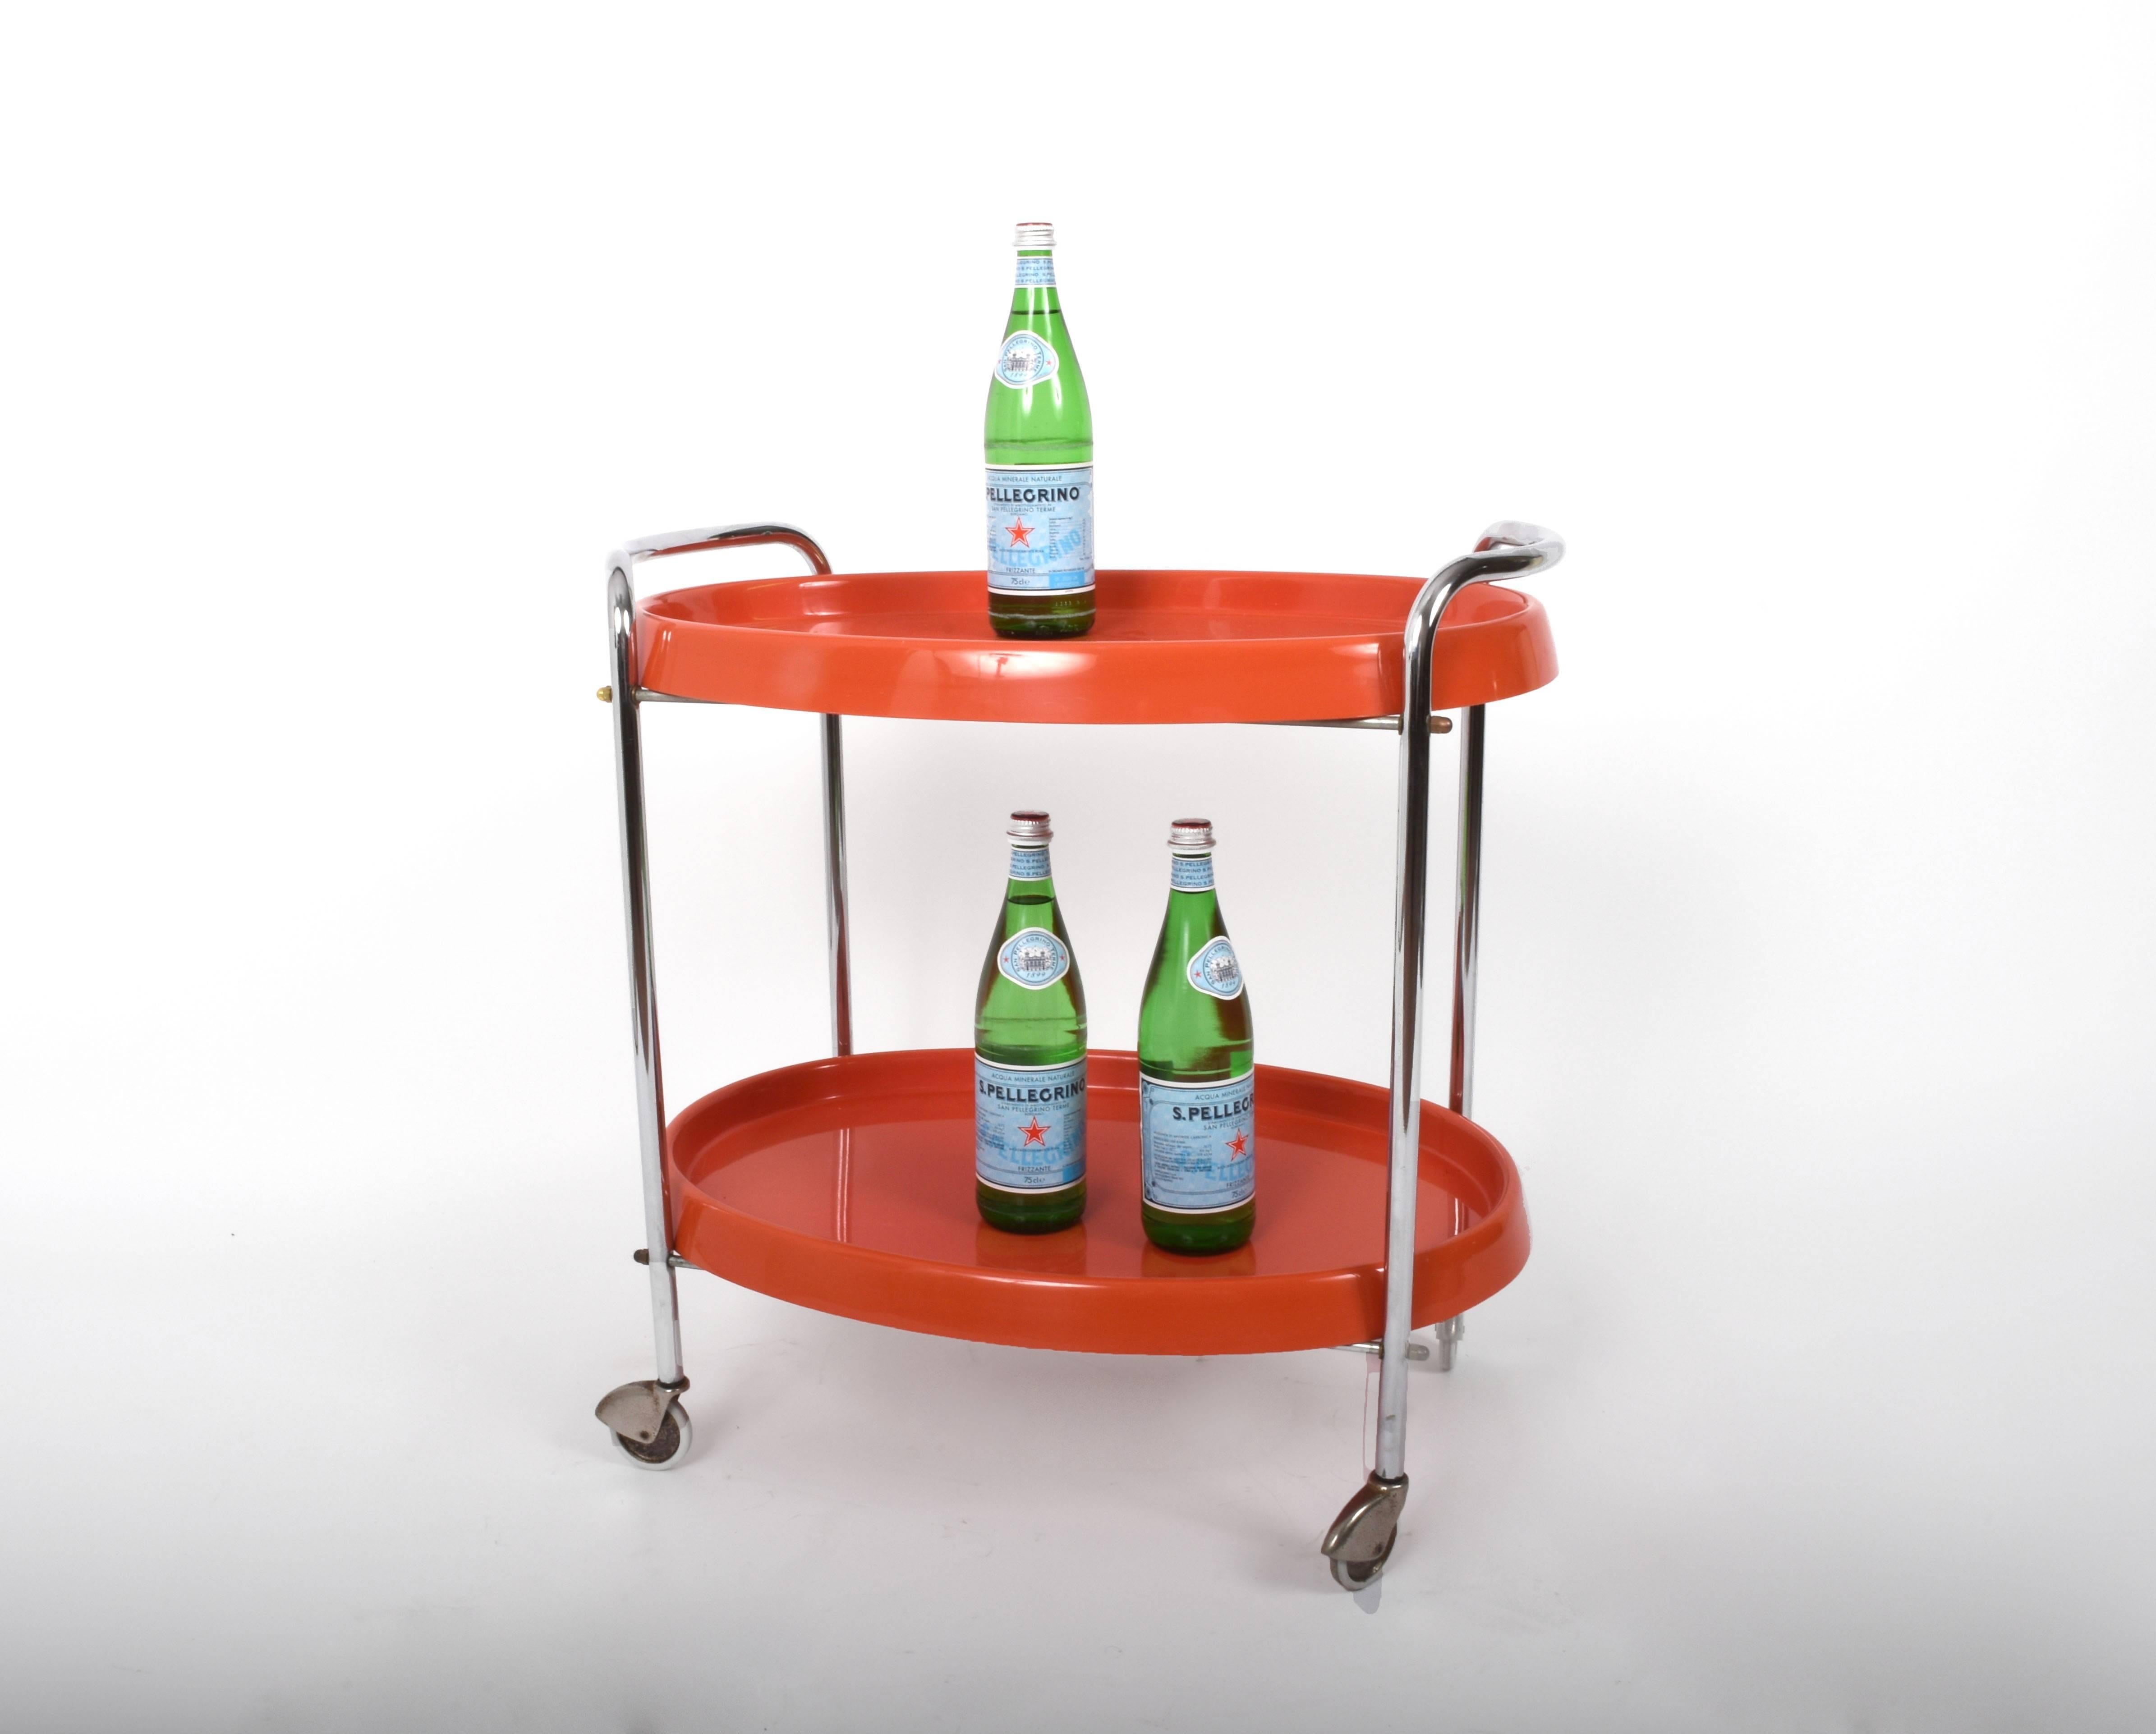 Very rare Italian bar cart from the 1950s. Chrome-plated metal and orange plastic. Very good condition.